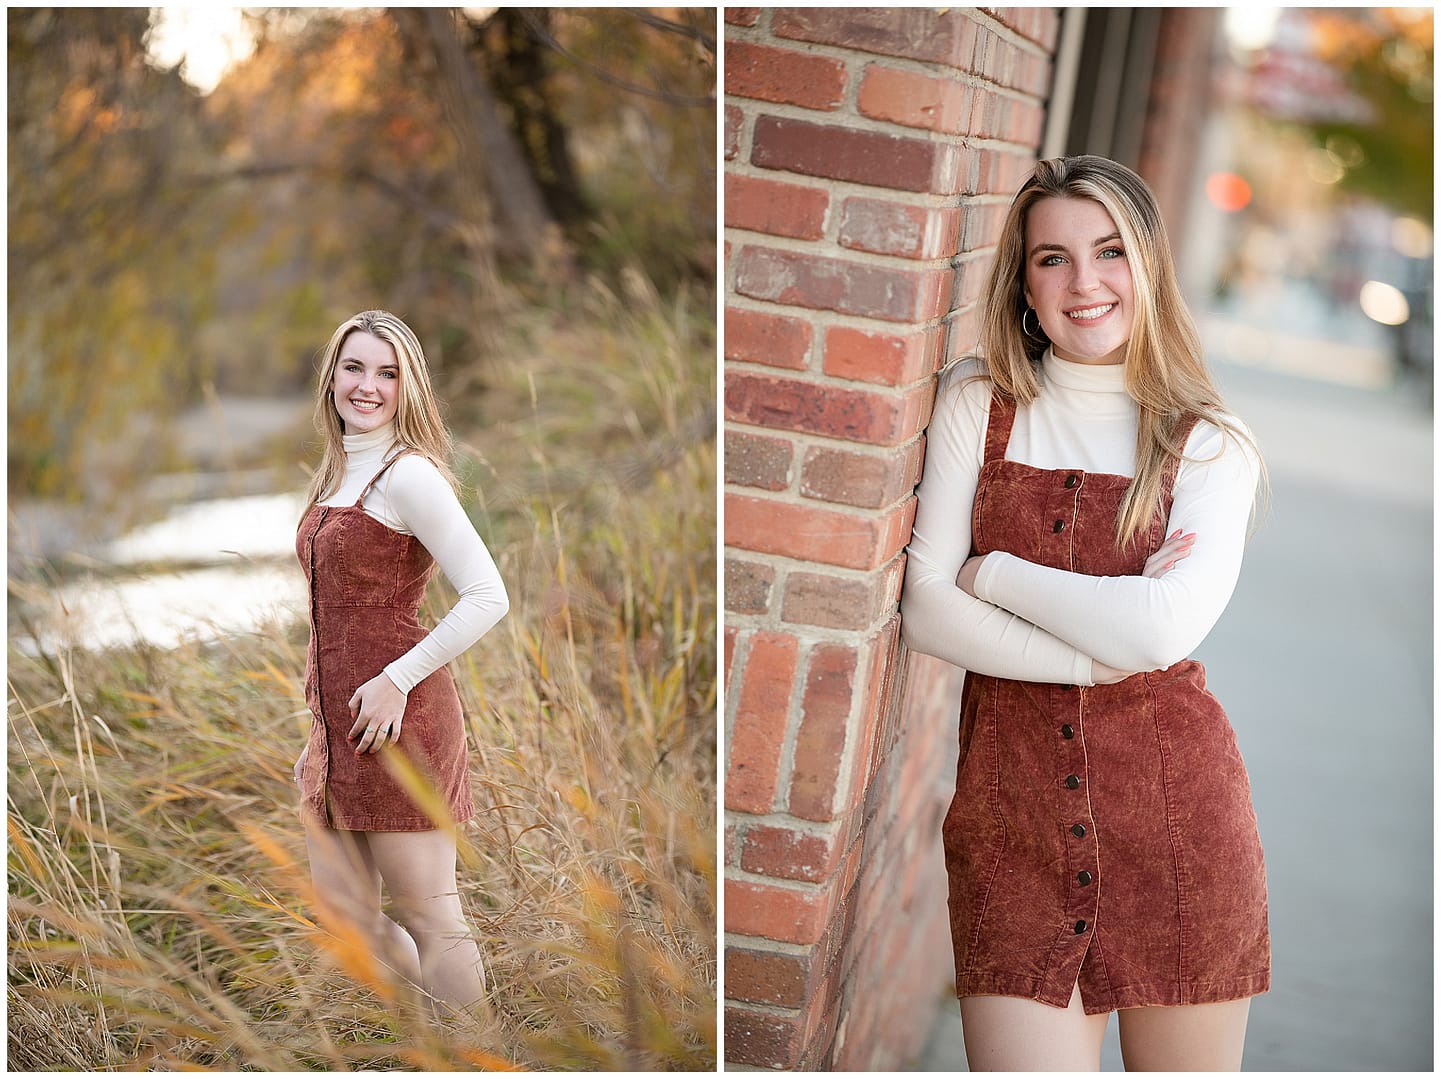 Senior girl poses for senior portraits in Boise,ID. Photos by Tiffany Hix Photography.